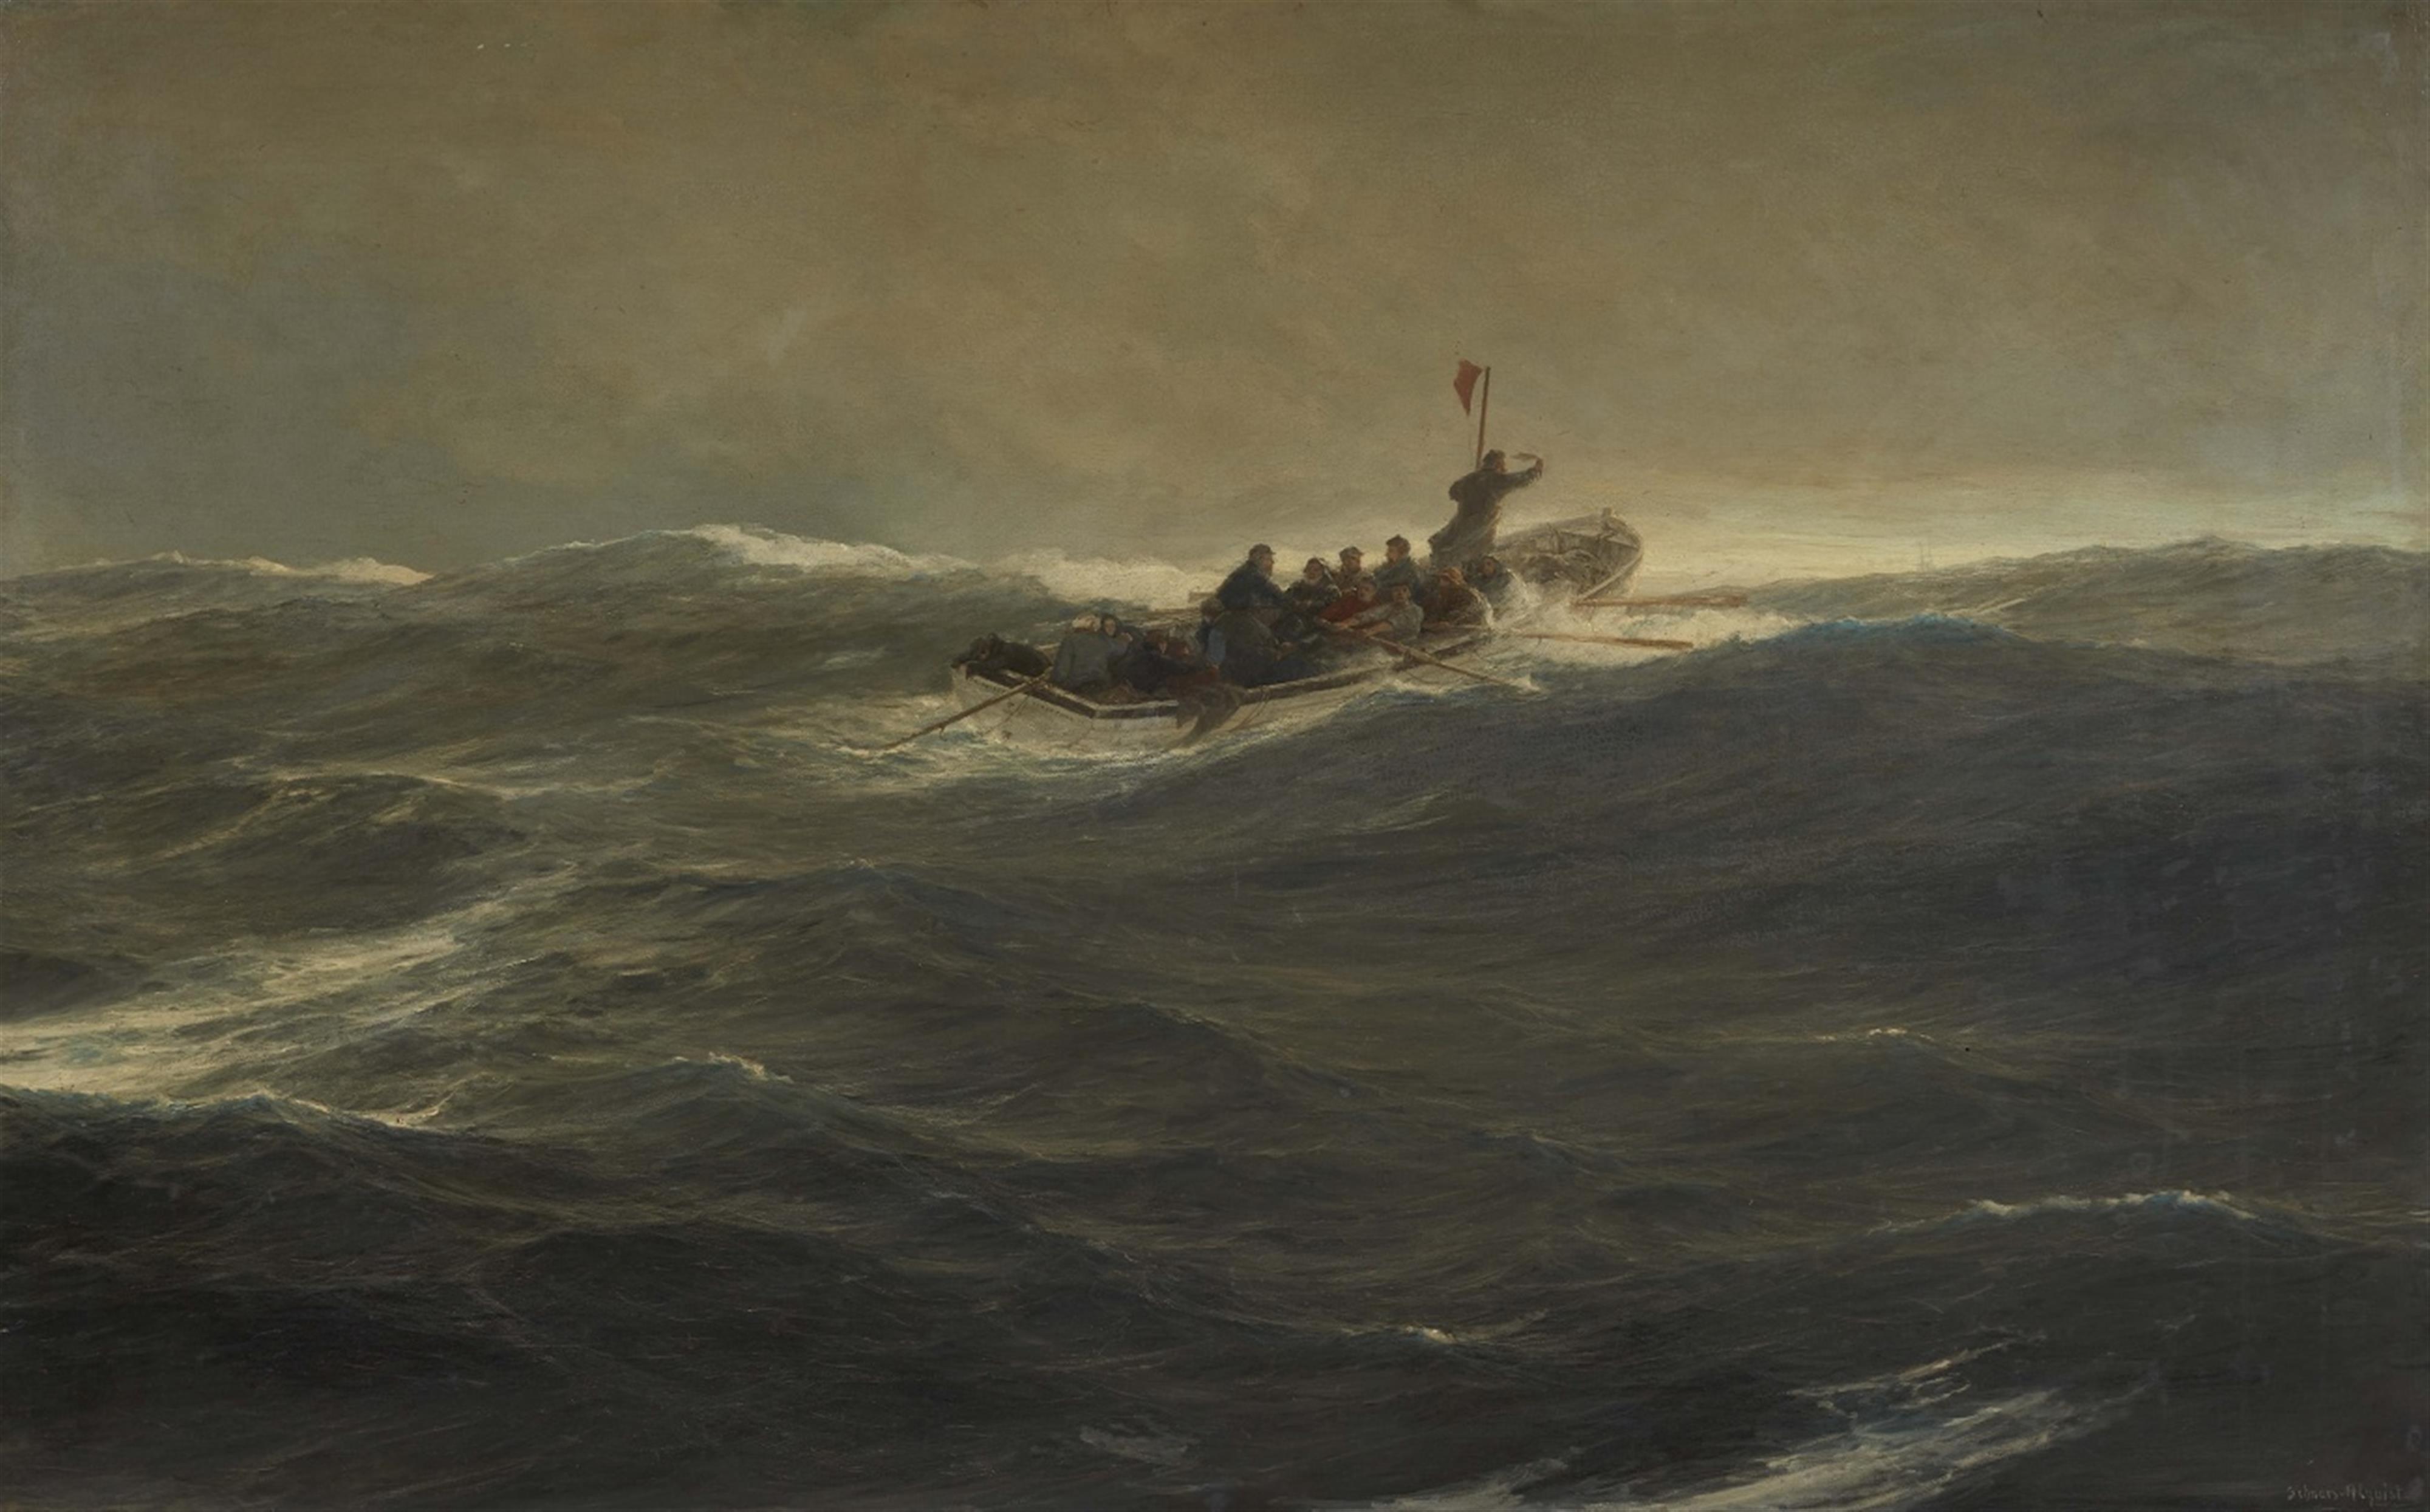 Hugo Schnars-Alquist - A Lifeboat at Sea (Help in Sight) - image-1